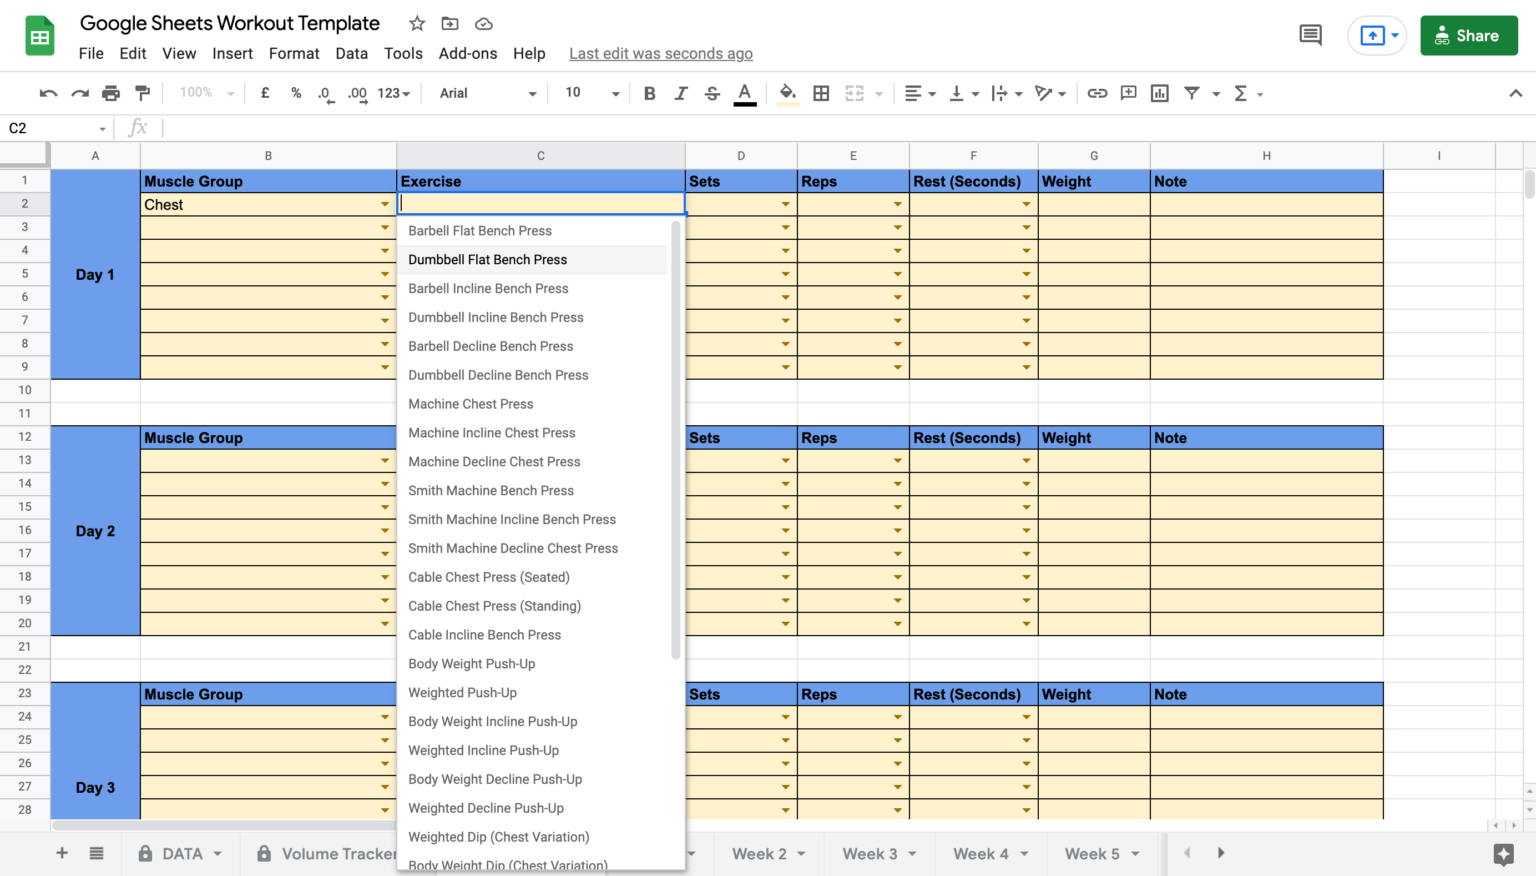 5 Day Training Plan Template Google Sheets for Gym